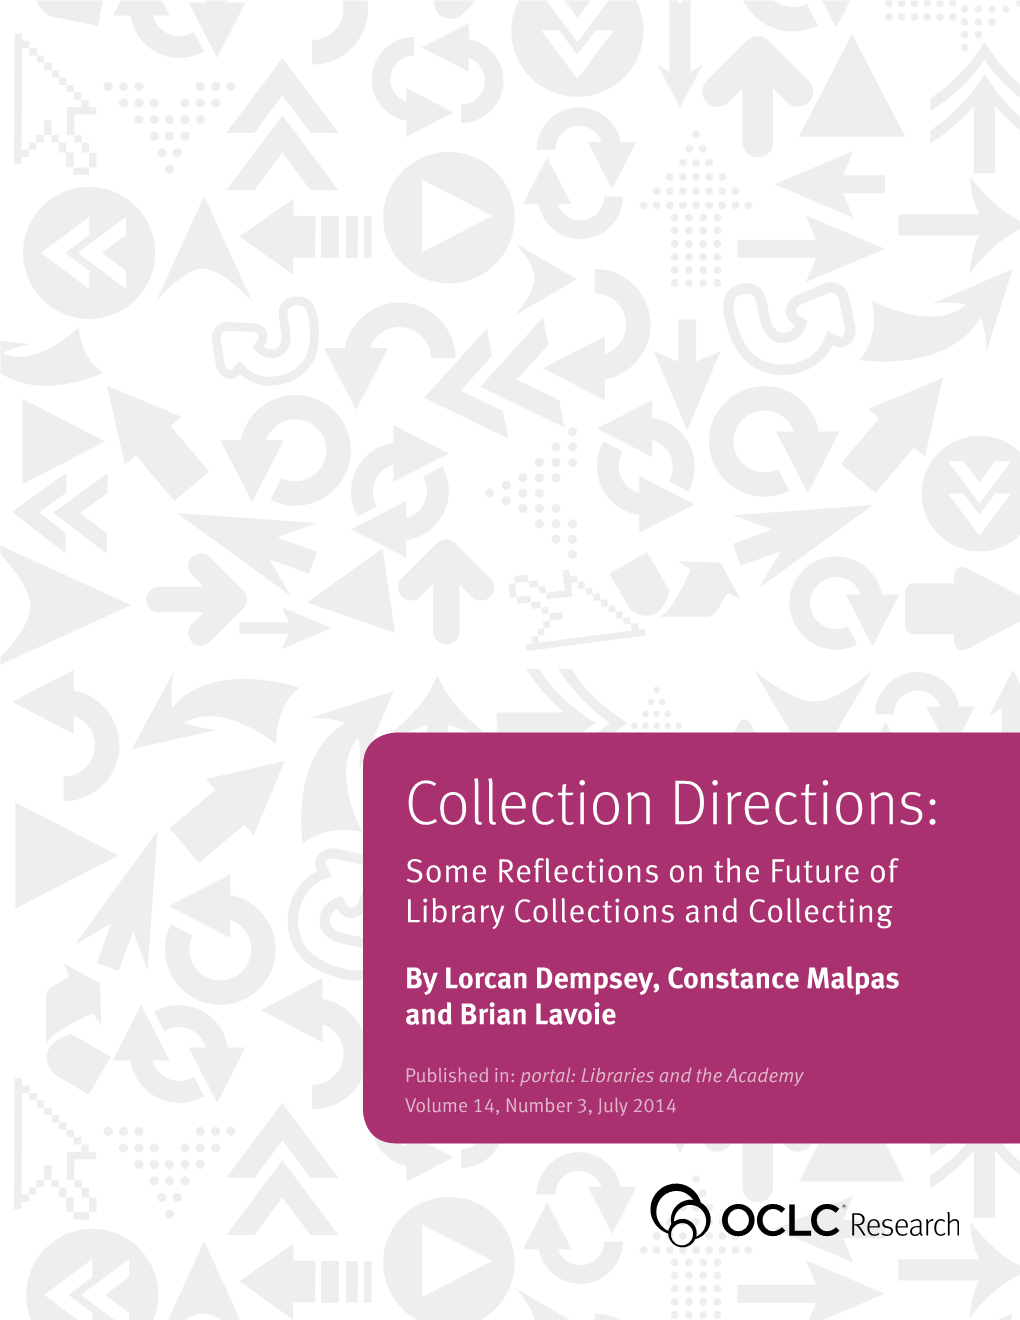 Collection Directions: Some Reflections on the Future of Library Collections and Collecting